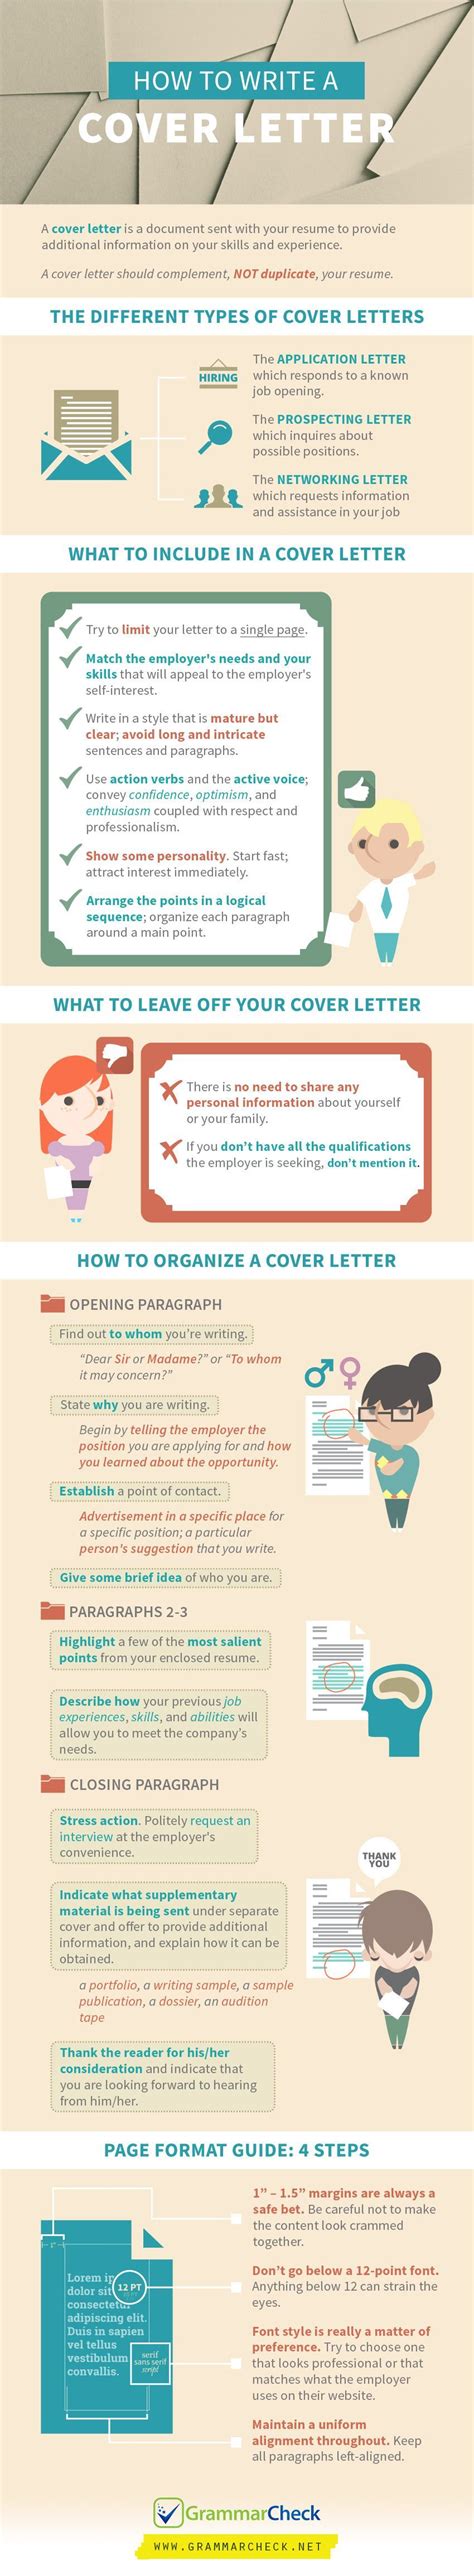 Customize each cover letter with a proper address, do not use to whom it may concern. No title (With images) | Job cover letter, Writing a cover ...